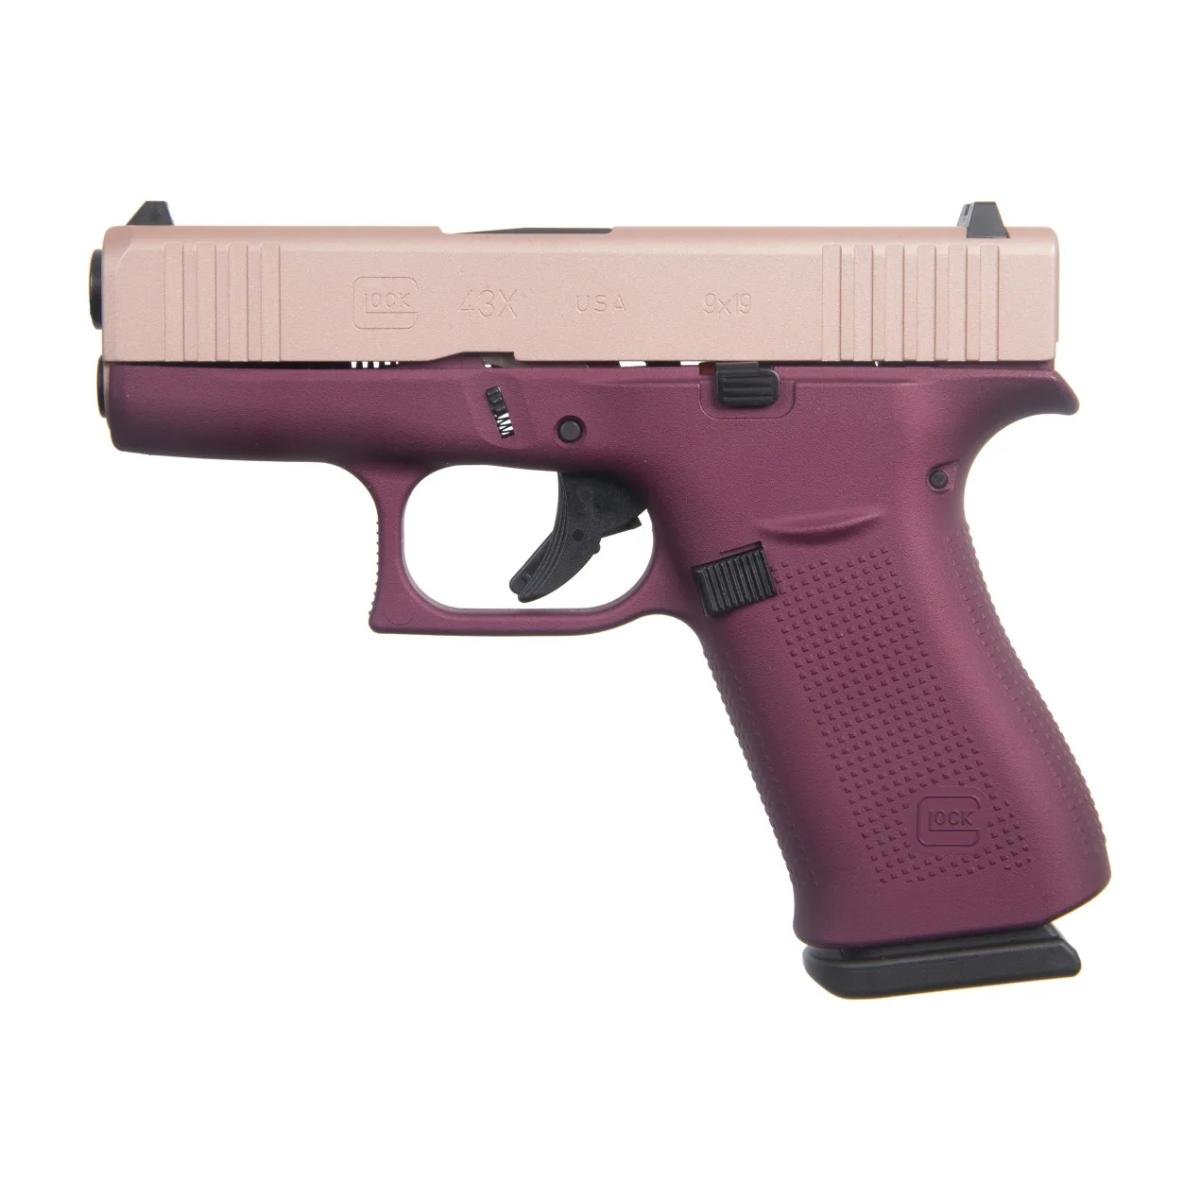 Glock 43X Special Edition - Black Cherry Rose Gold 9mm